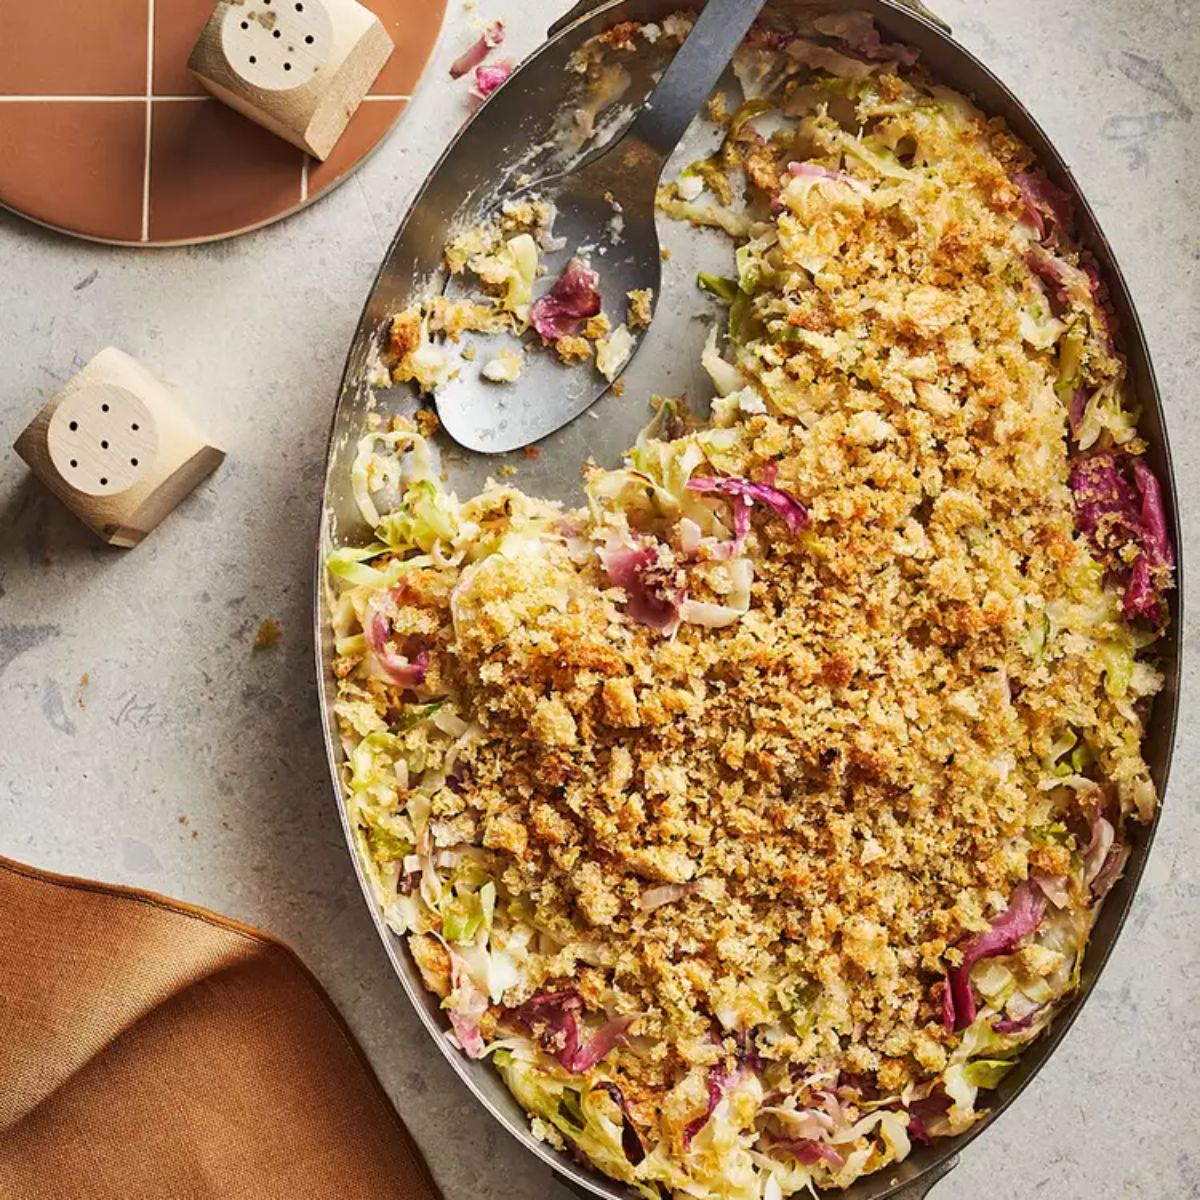 Creamed cabbage & sauerkraut with rye breadcrumbs in a casserole with a spoon.